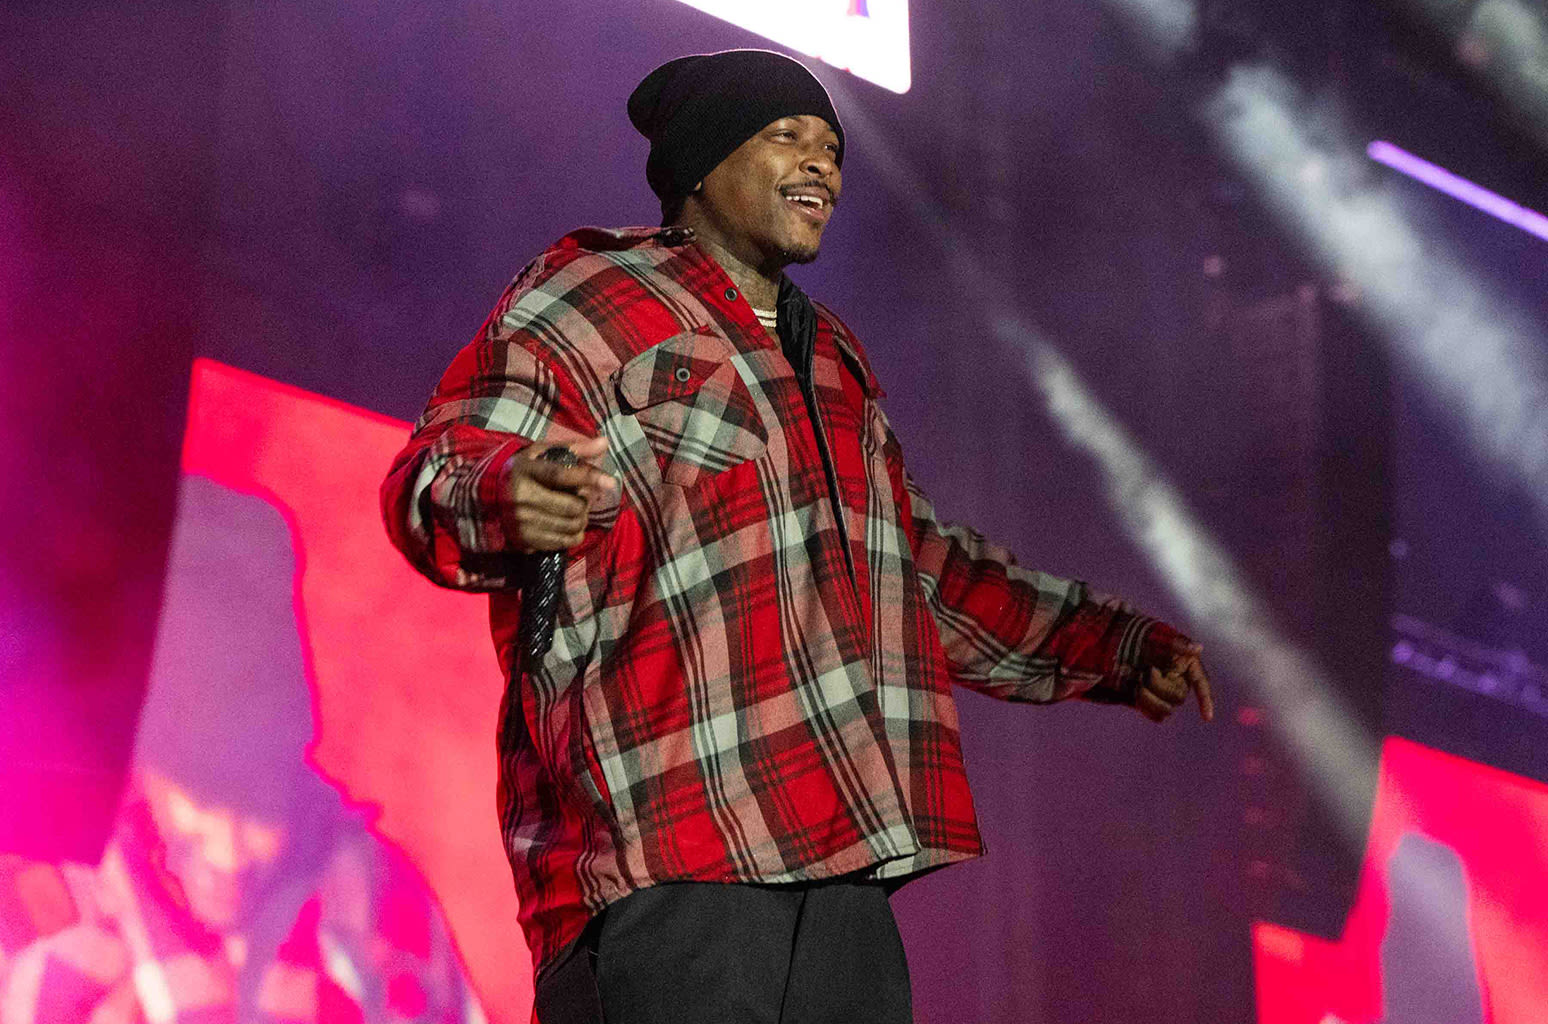 YG Readies Doe Boy-Assisted Just Re’d Up North American Tour: Here Are the Dates